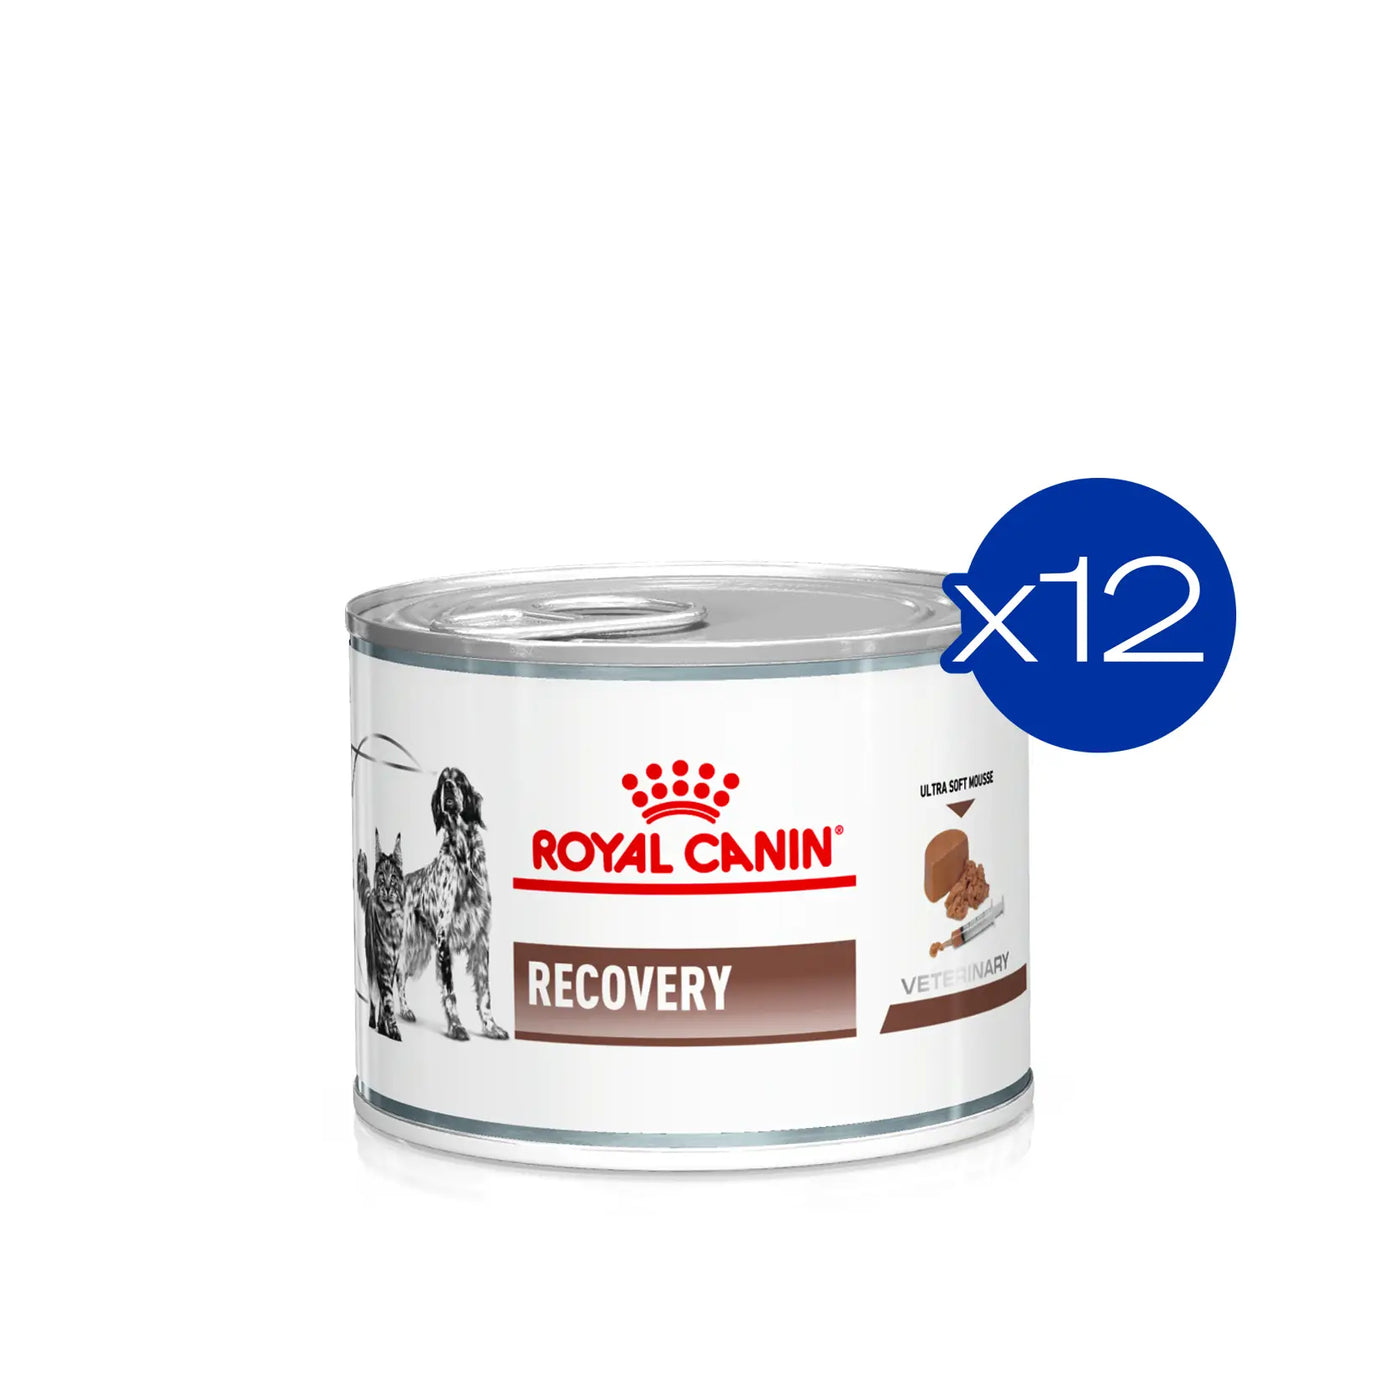 Royal Canin - Recovery For Dogs/Cats 195g